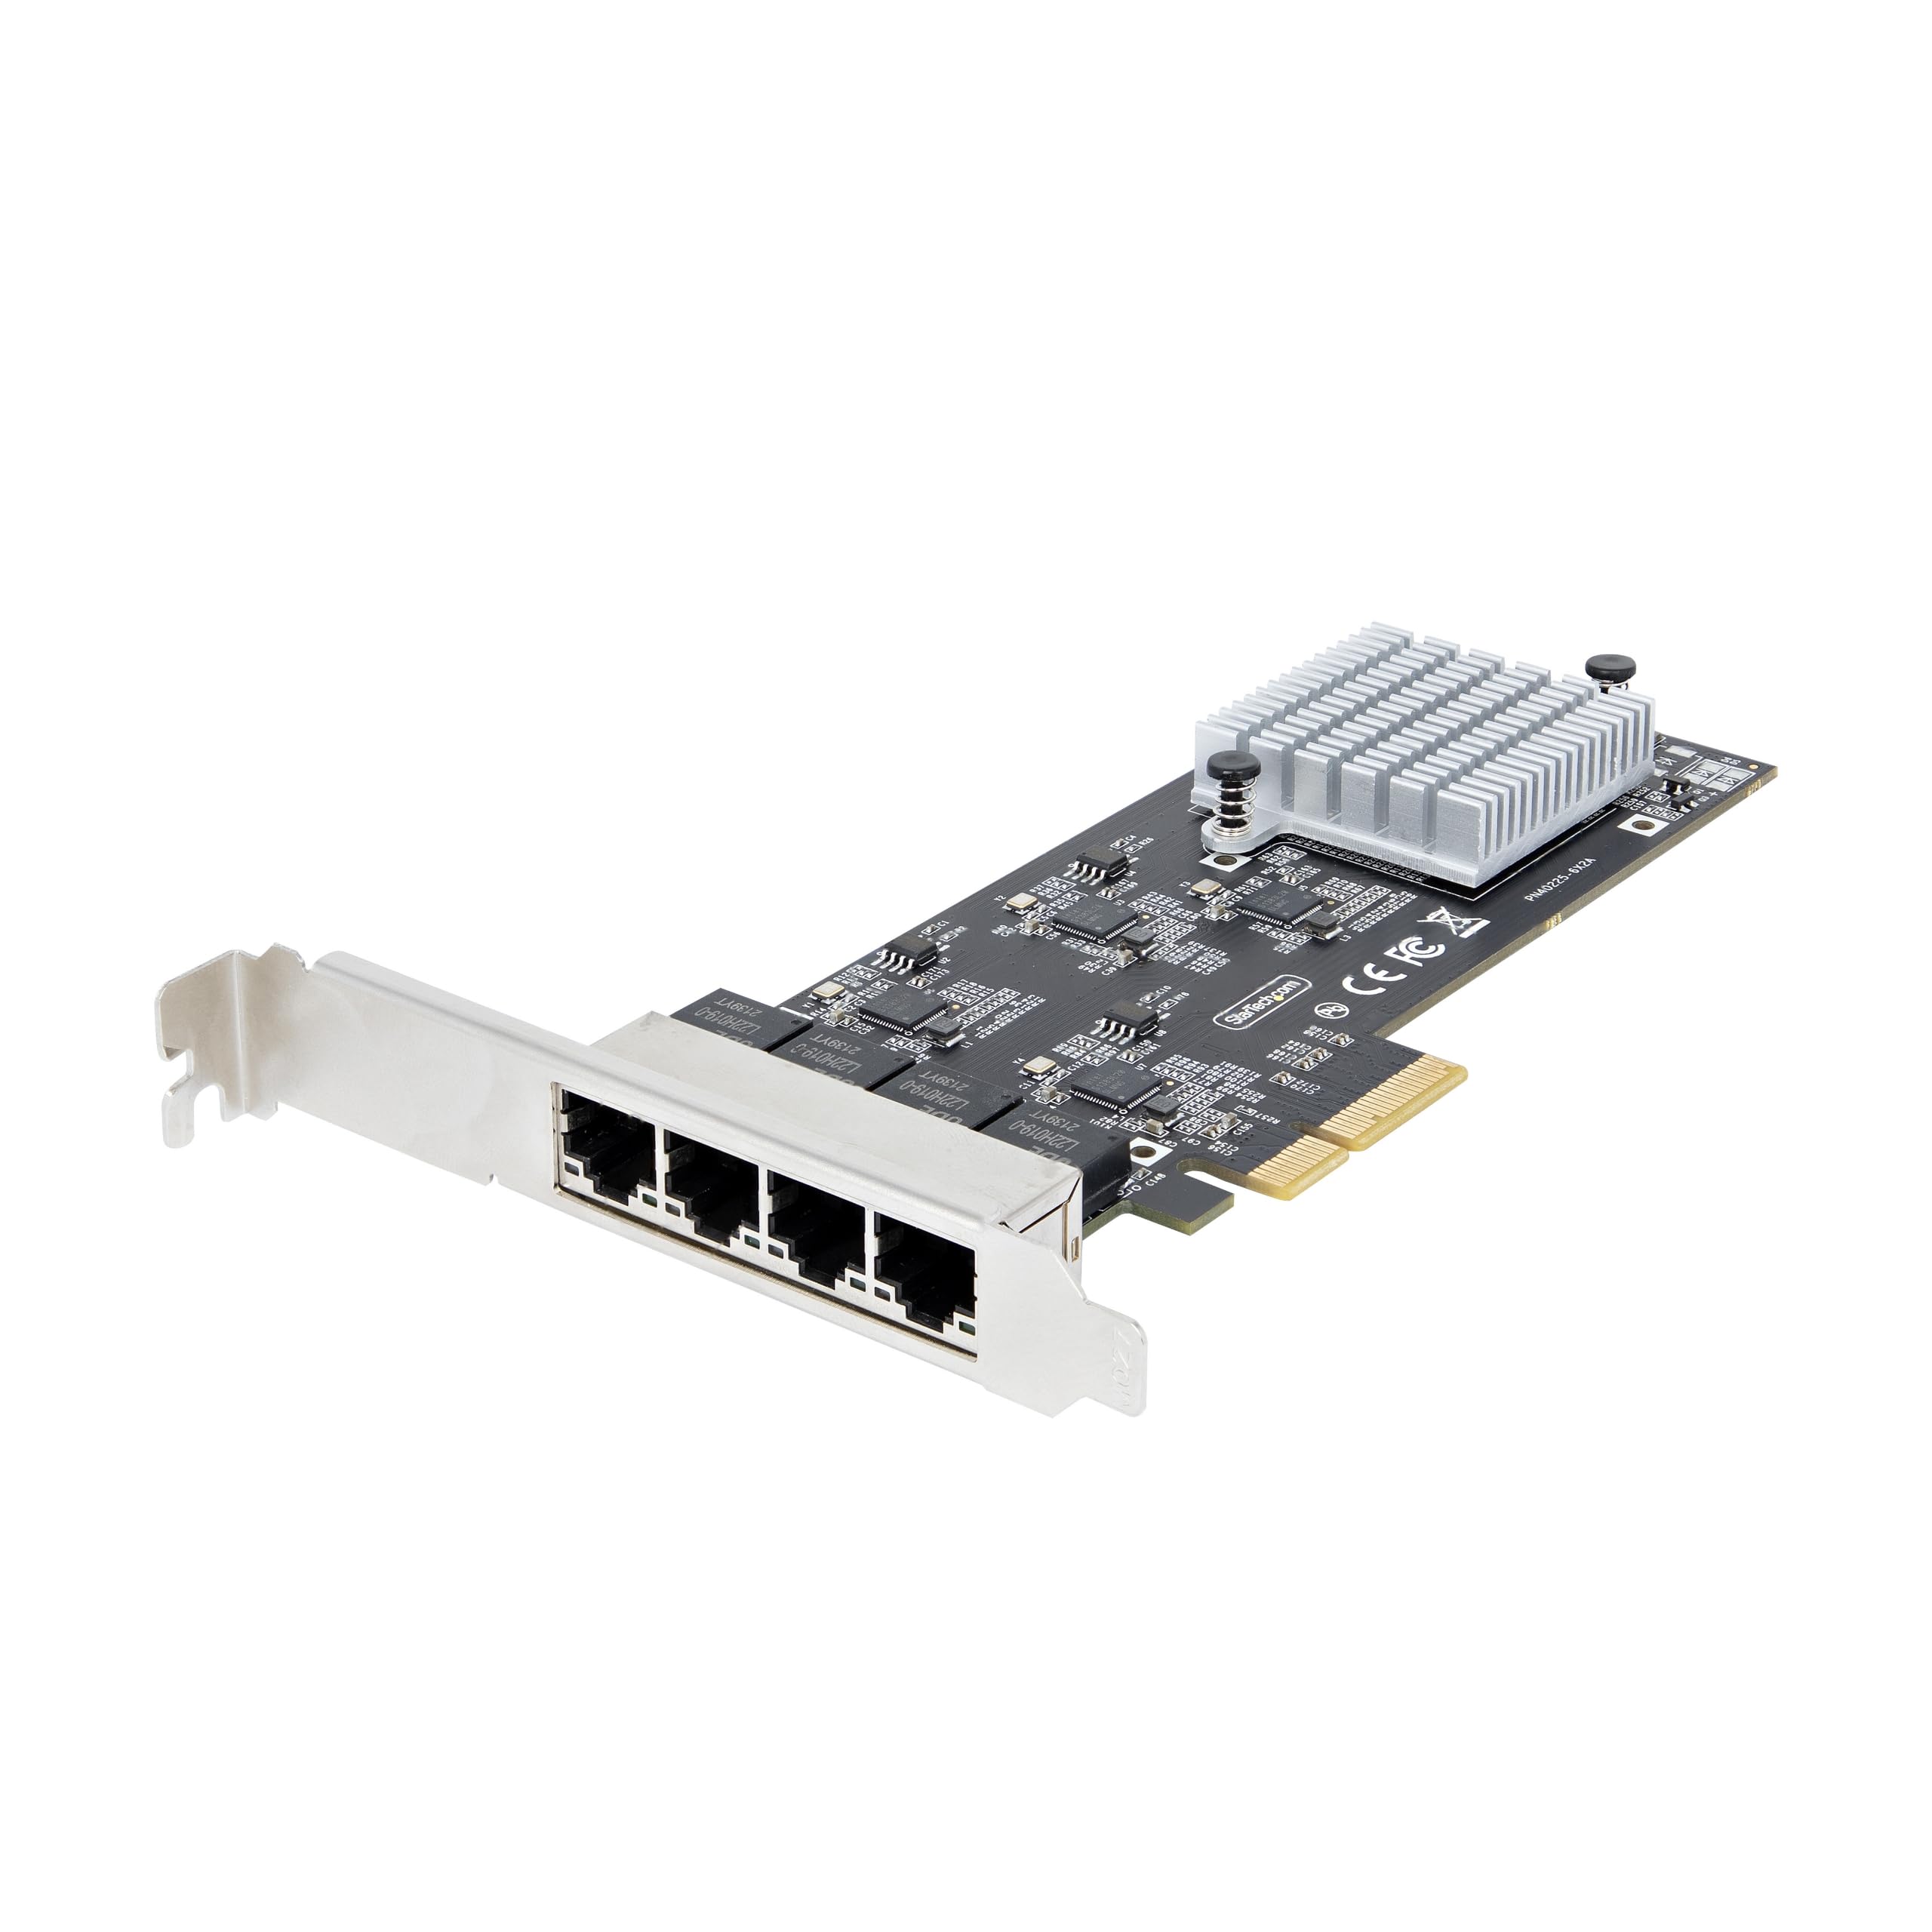 4-PORT 2.5G PCIE NETWORK CARD -